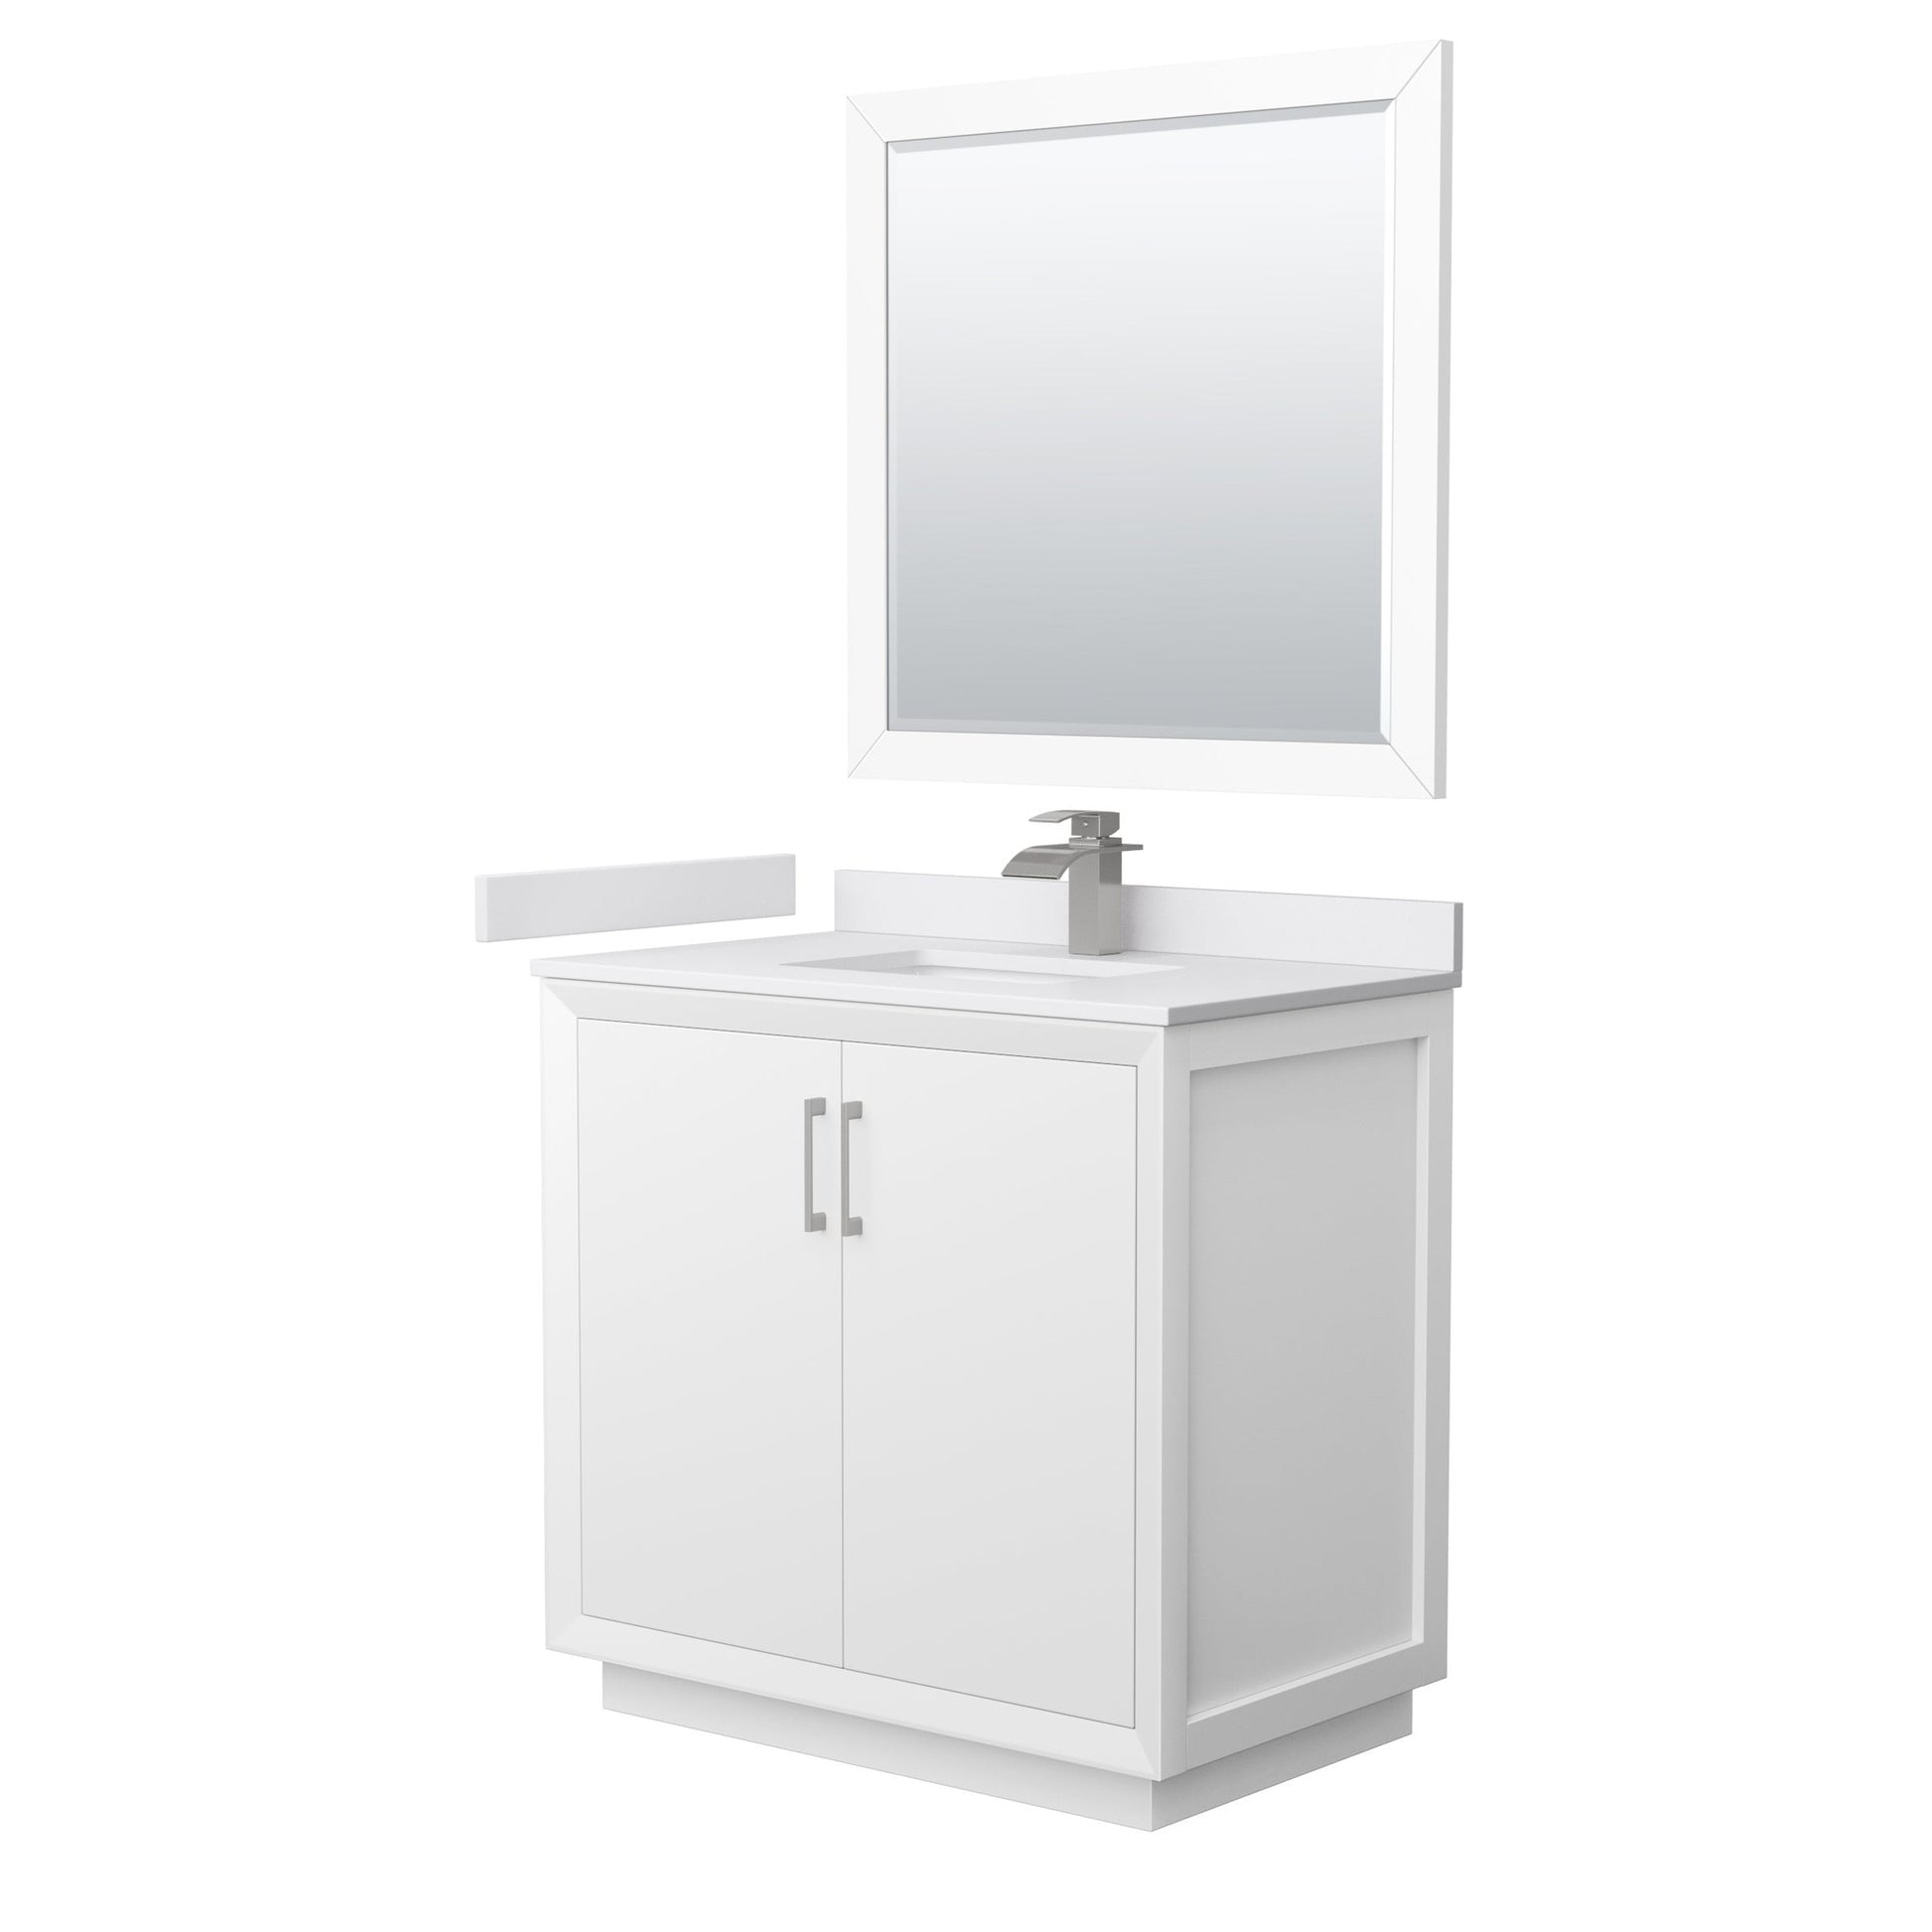 Wyndham Collection Strada 36" Single Bathroom Vanity in White, White Cultured Marble Countertop, Undermount Square Sink, Brushed Nickel Trim, 34" Mirror